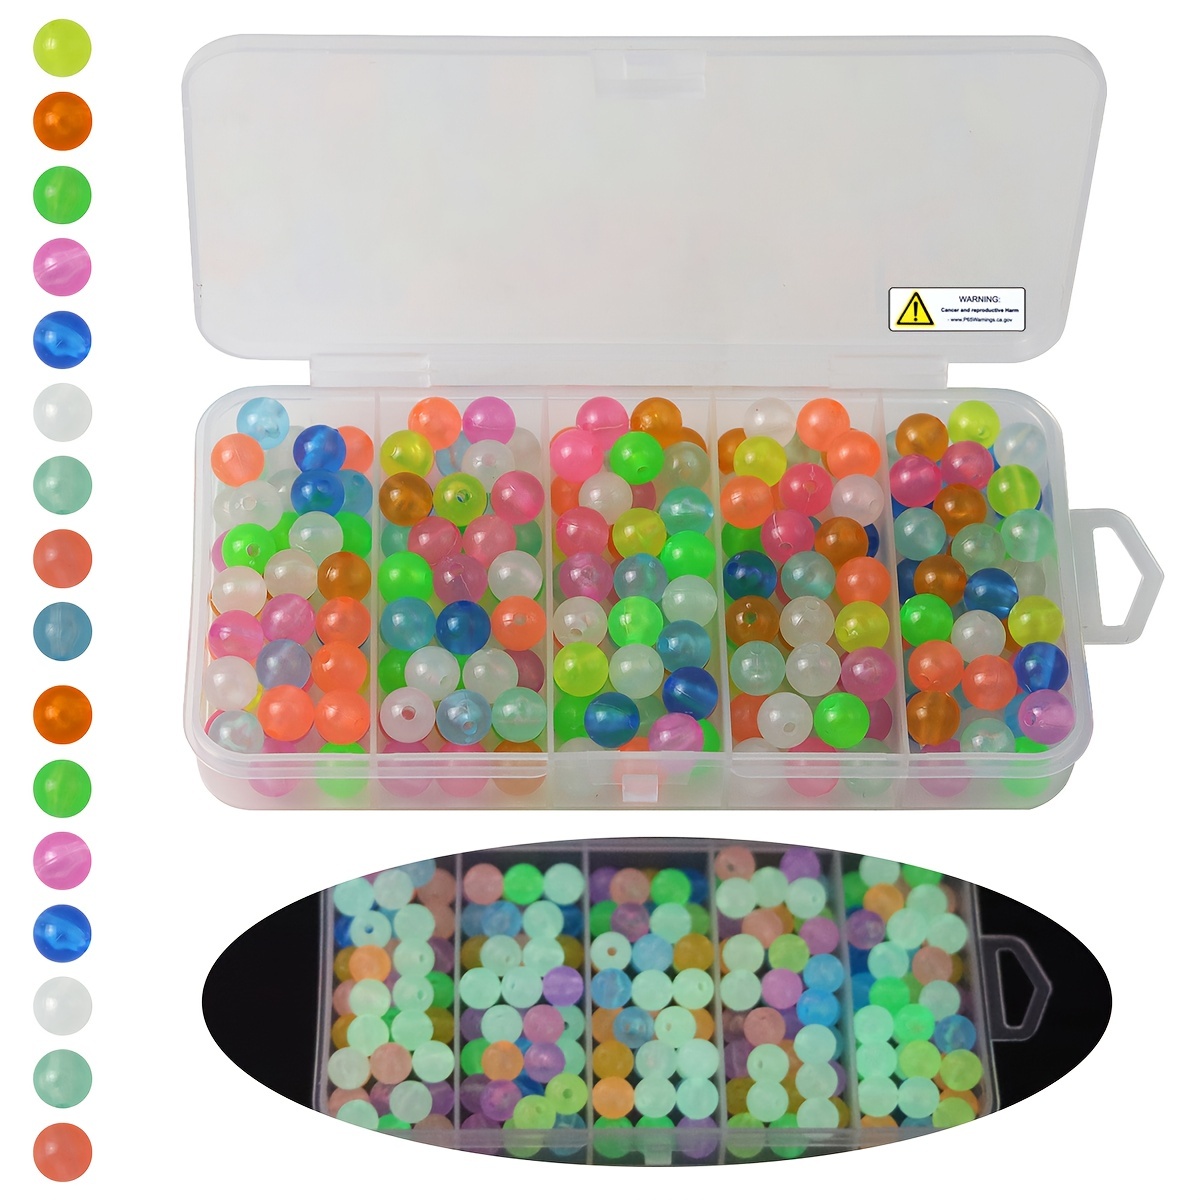 150Pcs/Box Fishing Eye Beads Plastic Round Fishing Line Bead Space Beans  For Taxes Rigs Slip Bobber Rigs DIY Bass Tackle - AliExpress